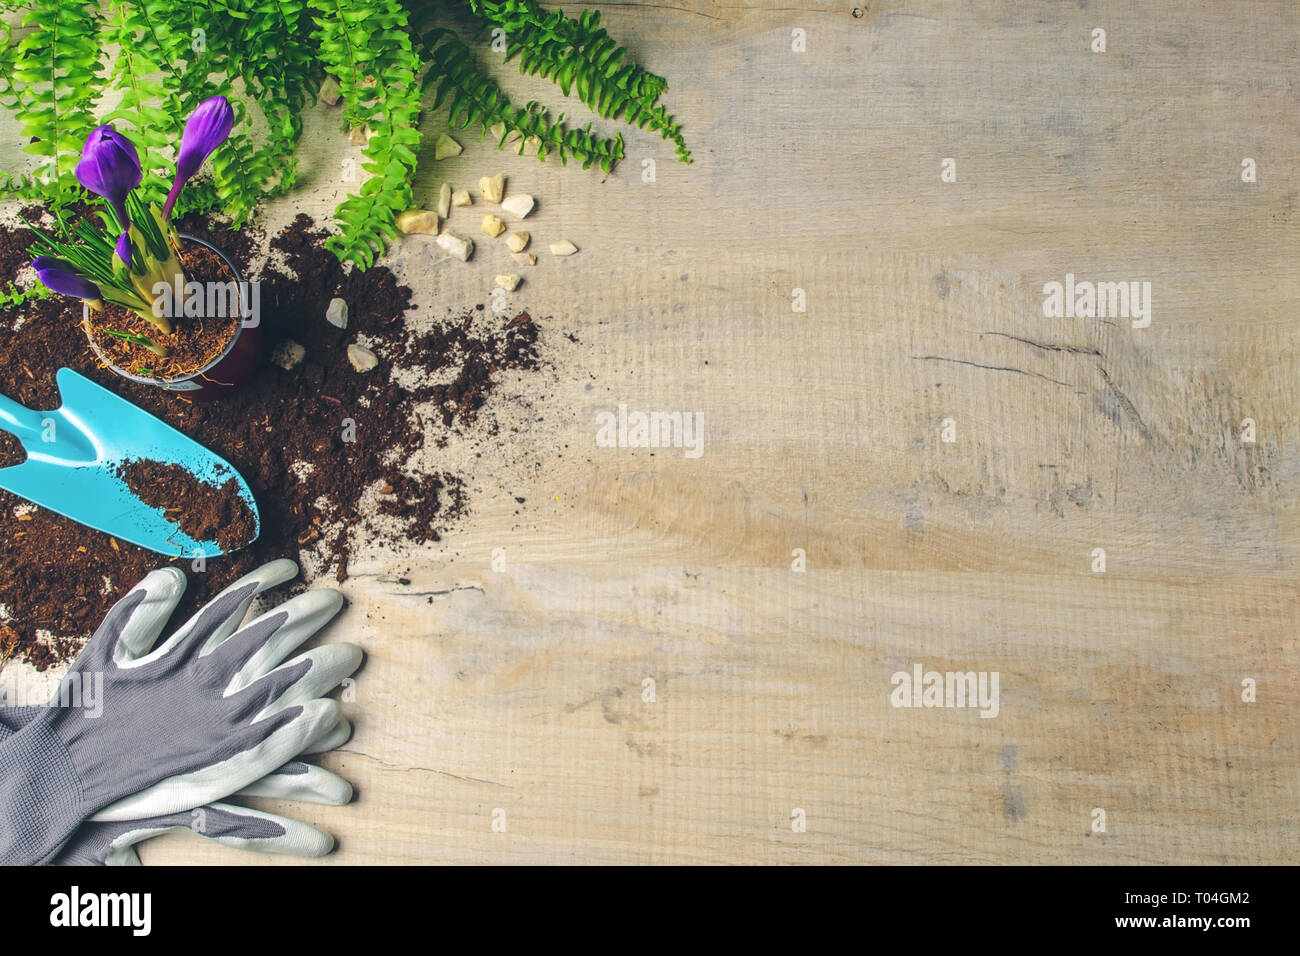 Potted flower, ground, spade and gloves on a wooden table. Spring gardening background. Stock Photo